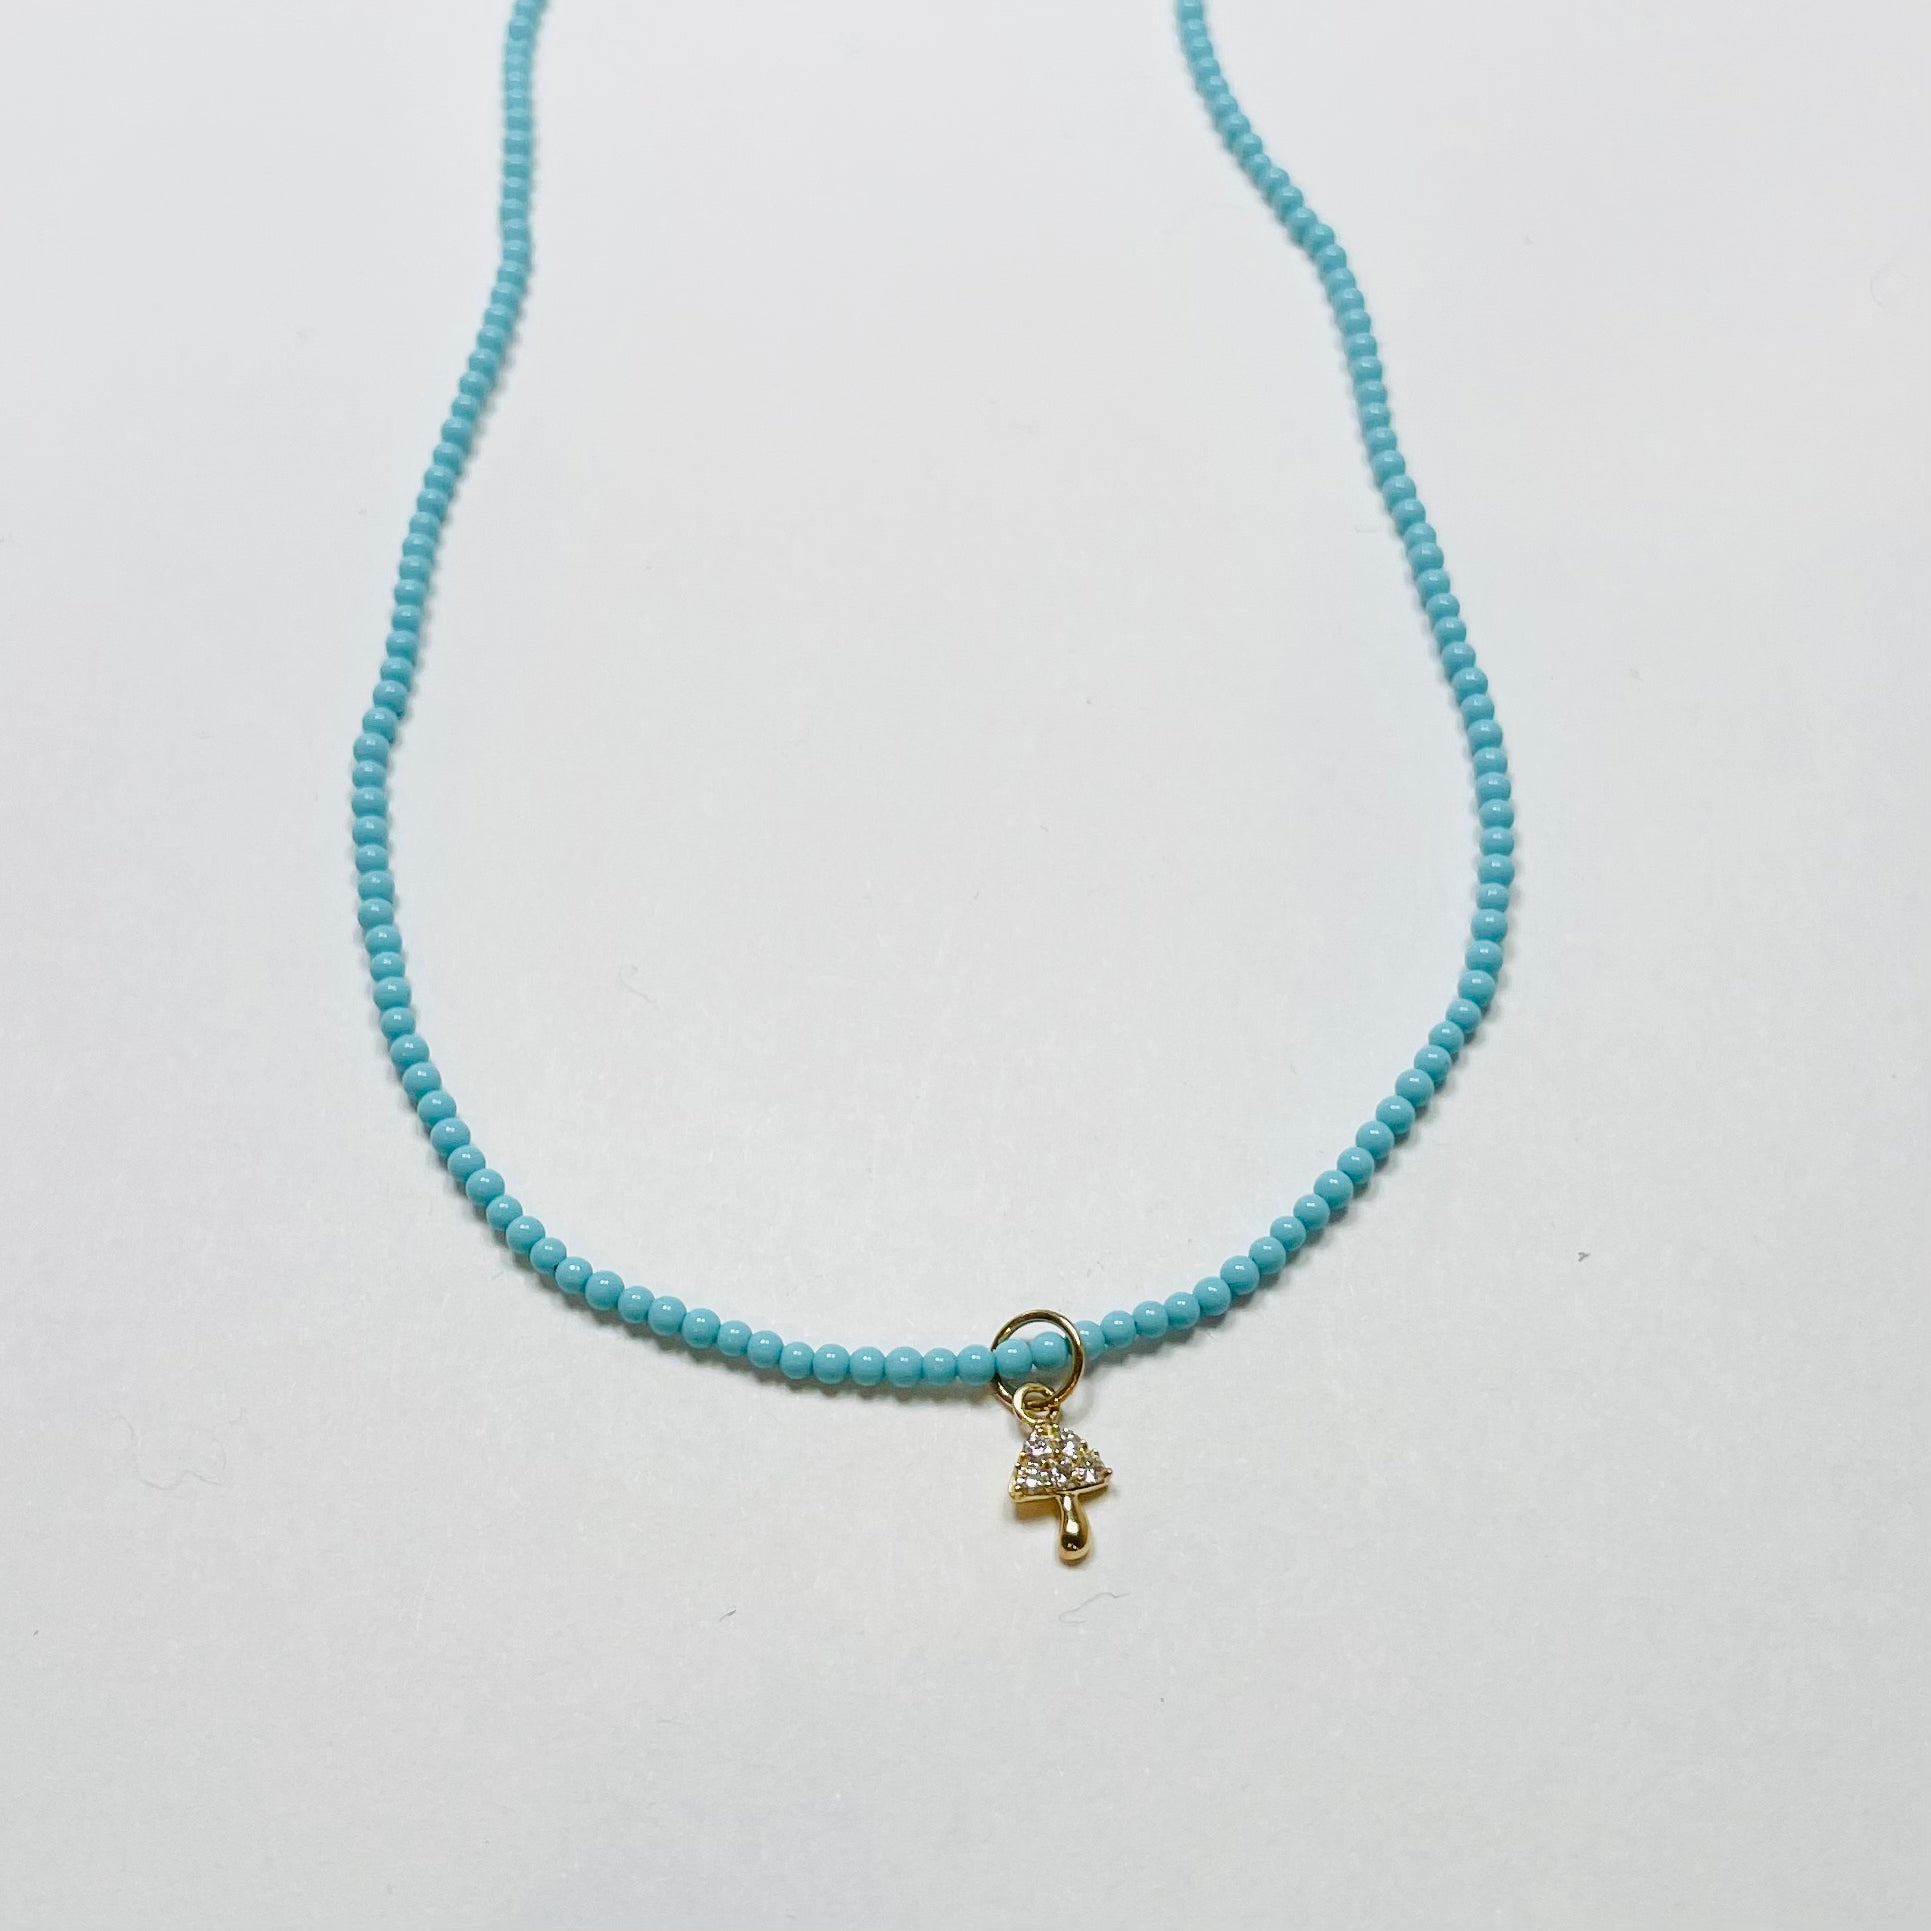 delicate turquoise necklace with mushroom charm